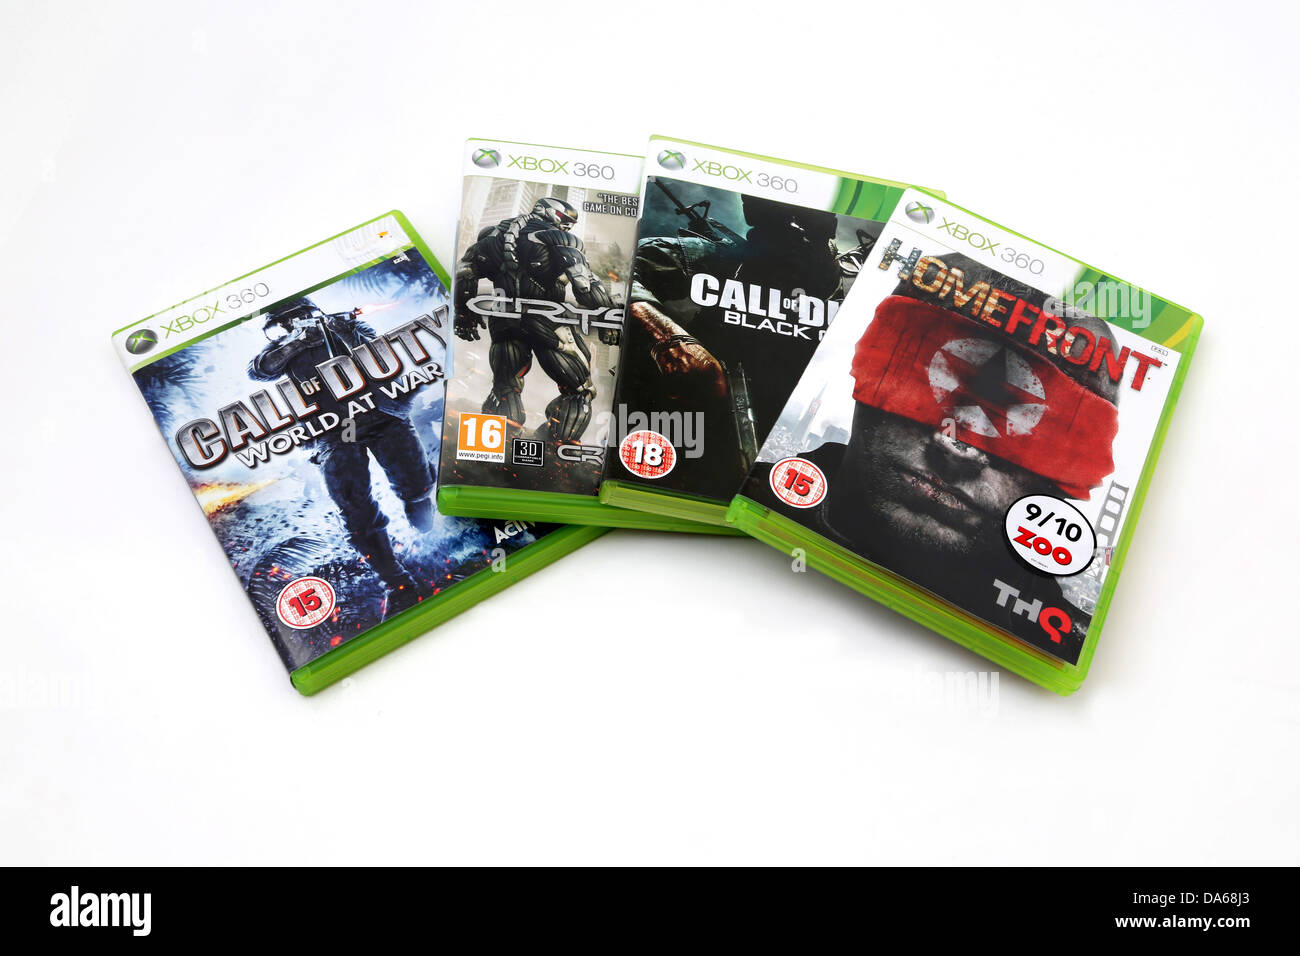 4 jeux XBOX 360 Call of Duty World at War, Crysis 2, Call of Duty Black Ops  et Homefront Photo Stock - Alamy